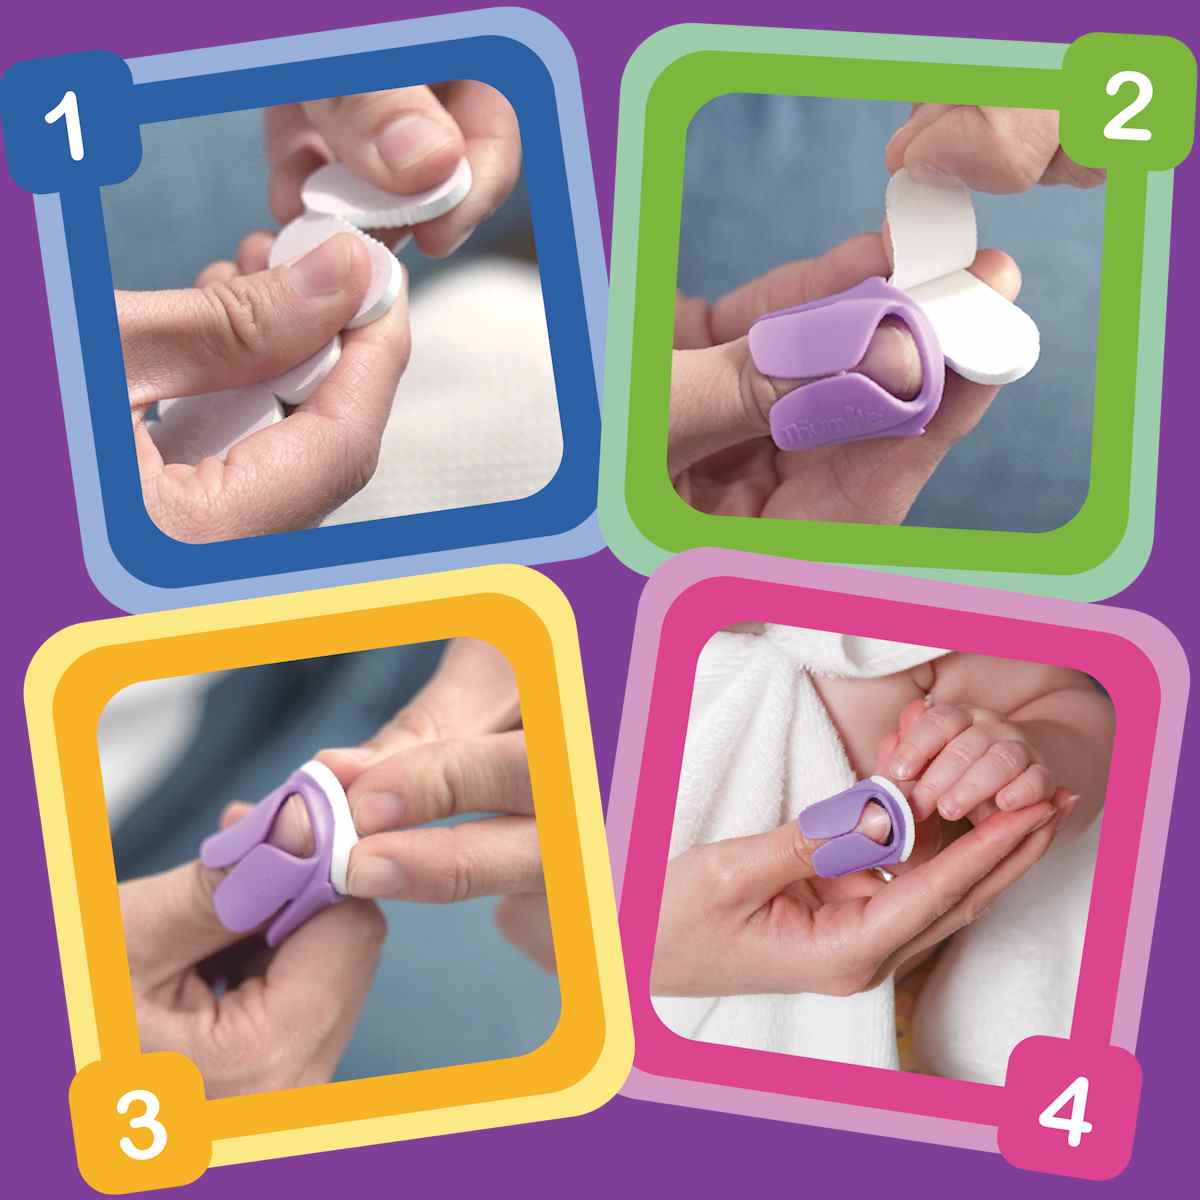 Baby Nails® - The Wearable Baby Nail File